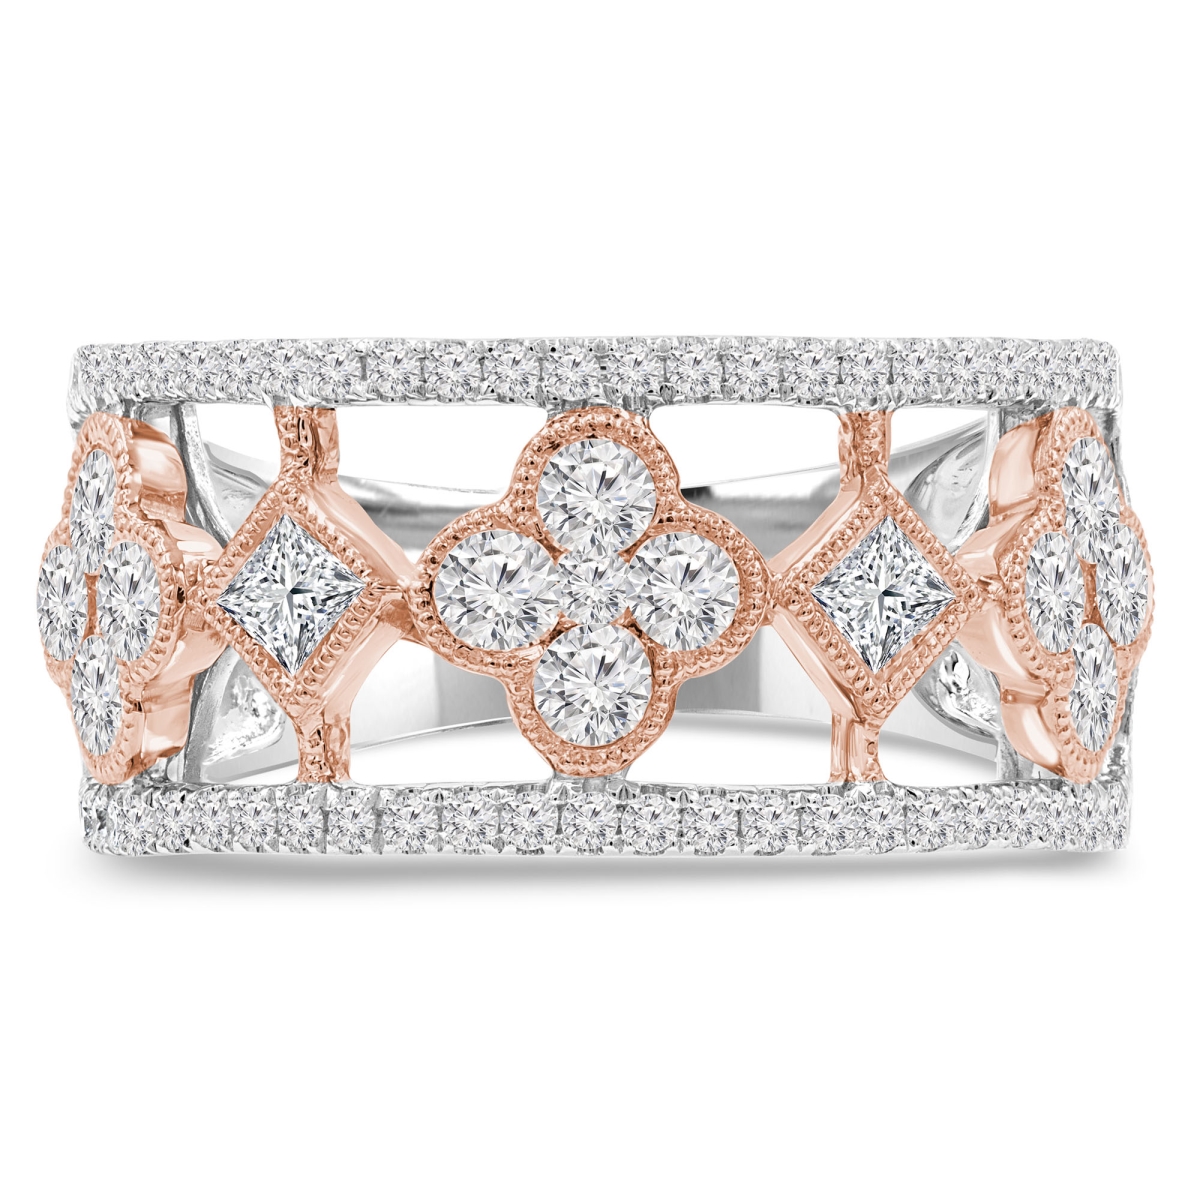 Picture of Majesty Diamonds MDR210138-9 1.13 CTW Princess Diamond Cocktail Ring in 14K Two-Tone Gold - Size 9